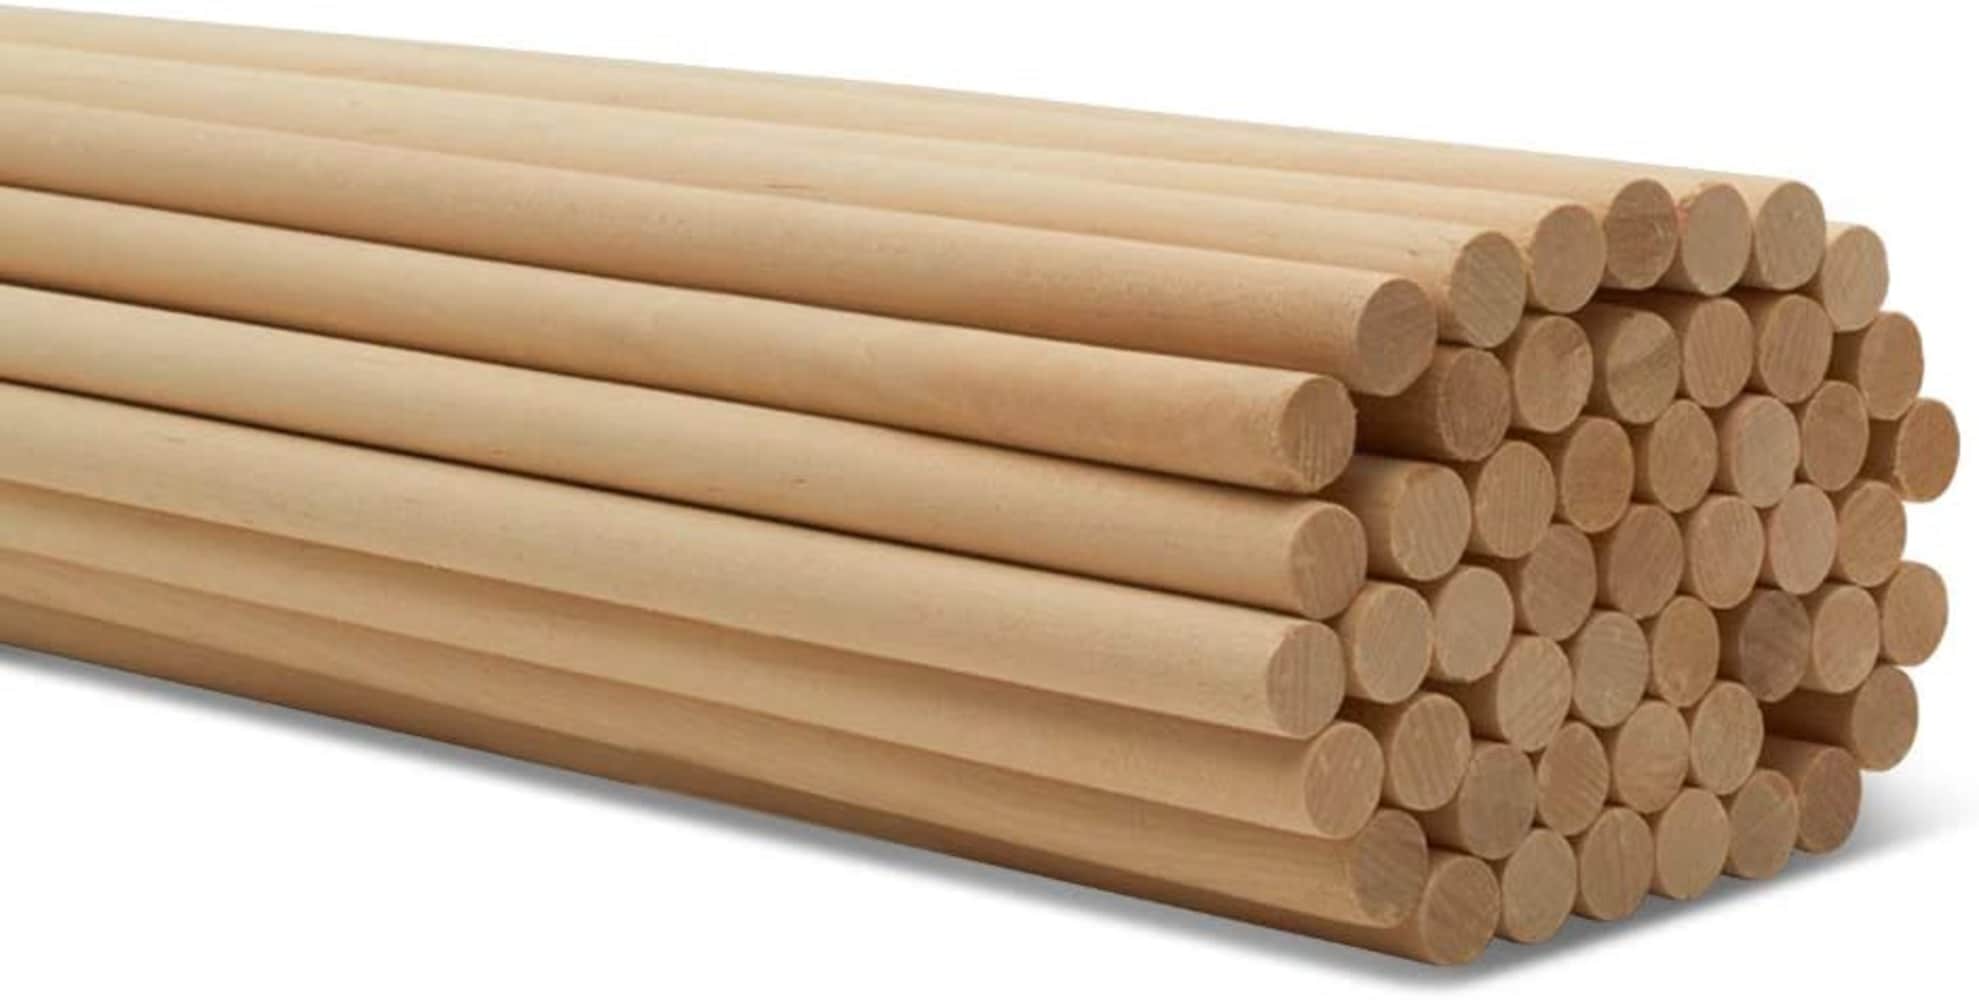 25ct Woodpeckers Crafts, DIY Unfinished Wood 24 x½ Dowel Rods, Pack of 25 Natural